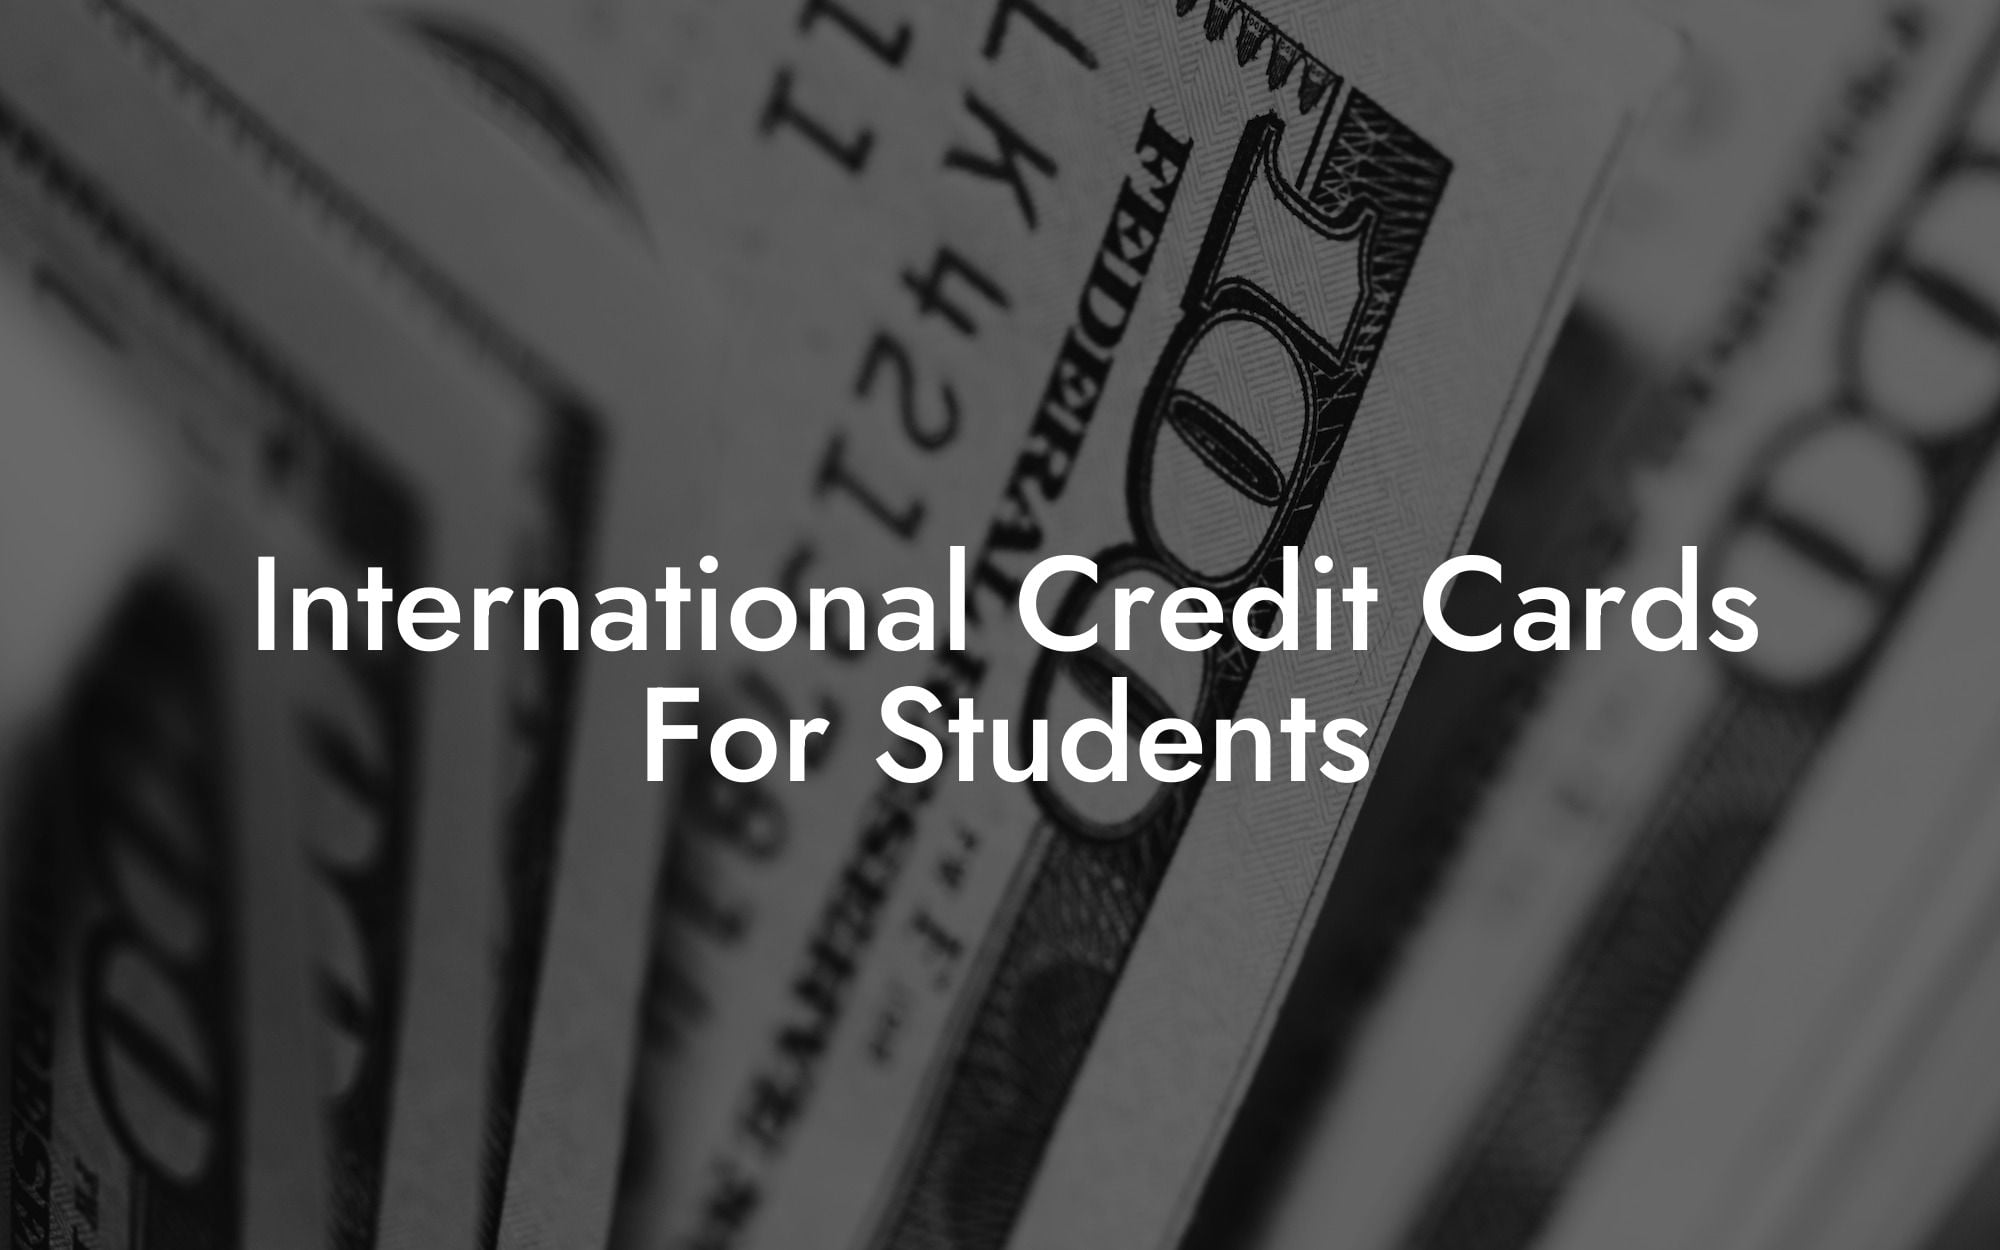 International Credit Cards For Students